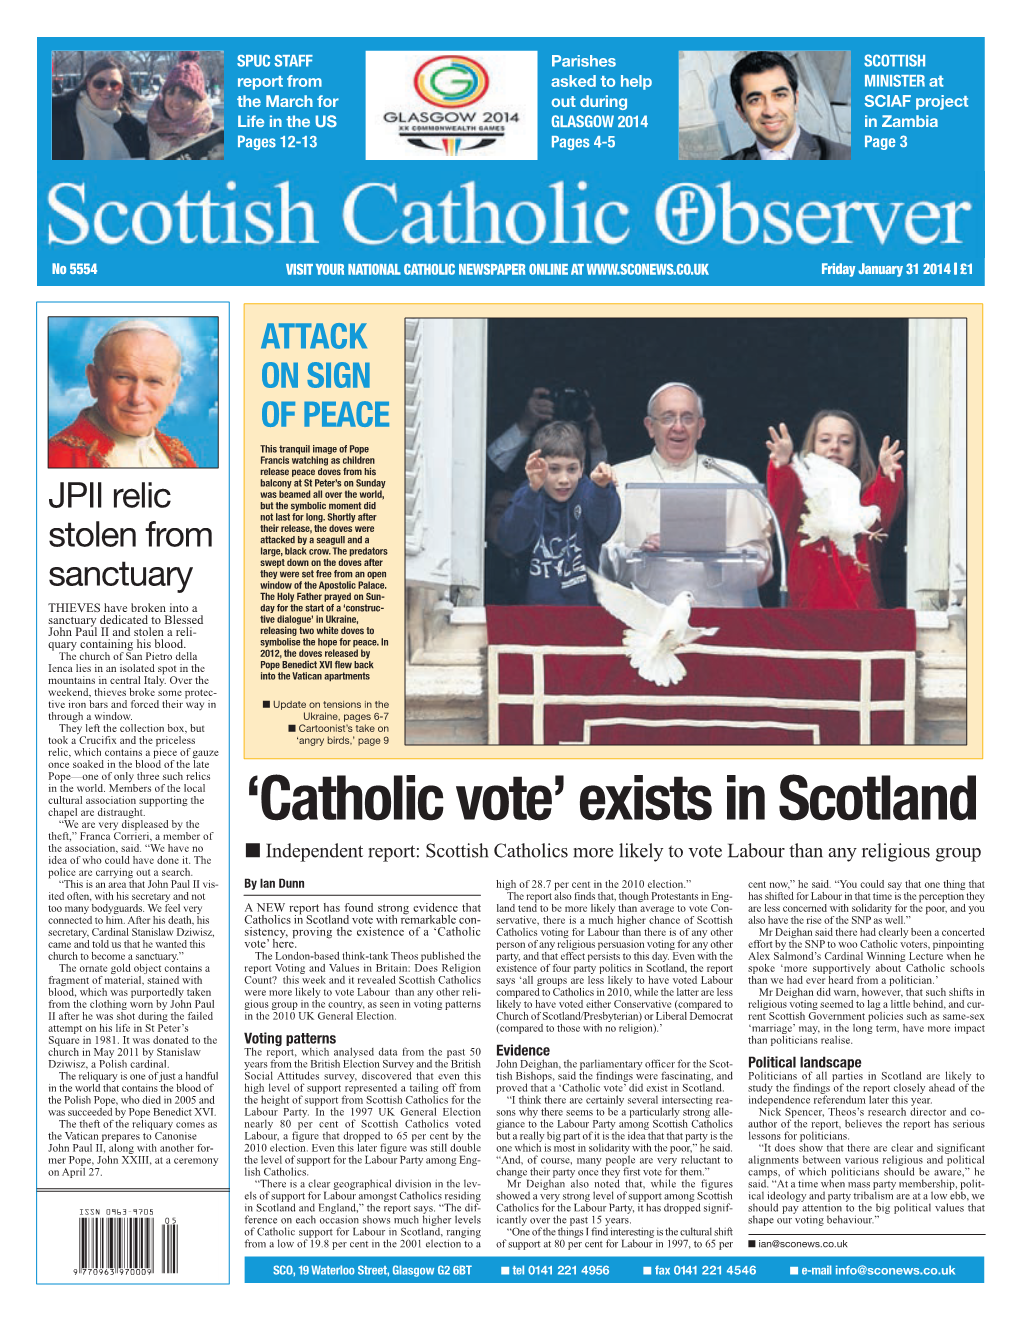 Catholic Vote’ Exists in Scotland “We Are Very Displeased by the Theft,” Franca Corrieri, a Member of the Association, Said